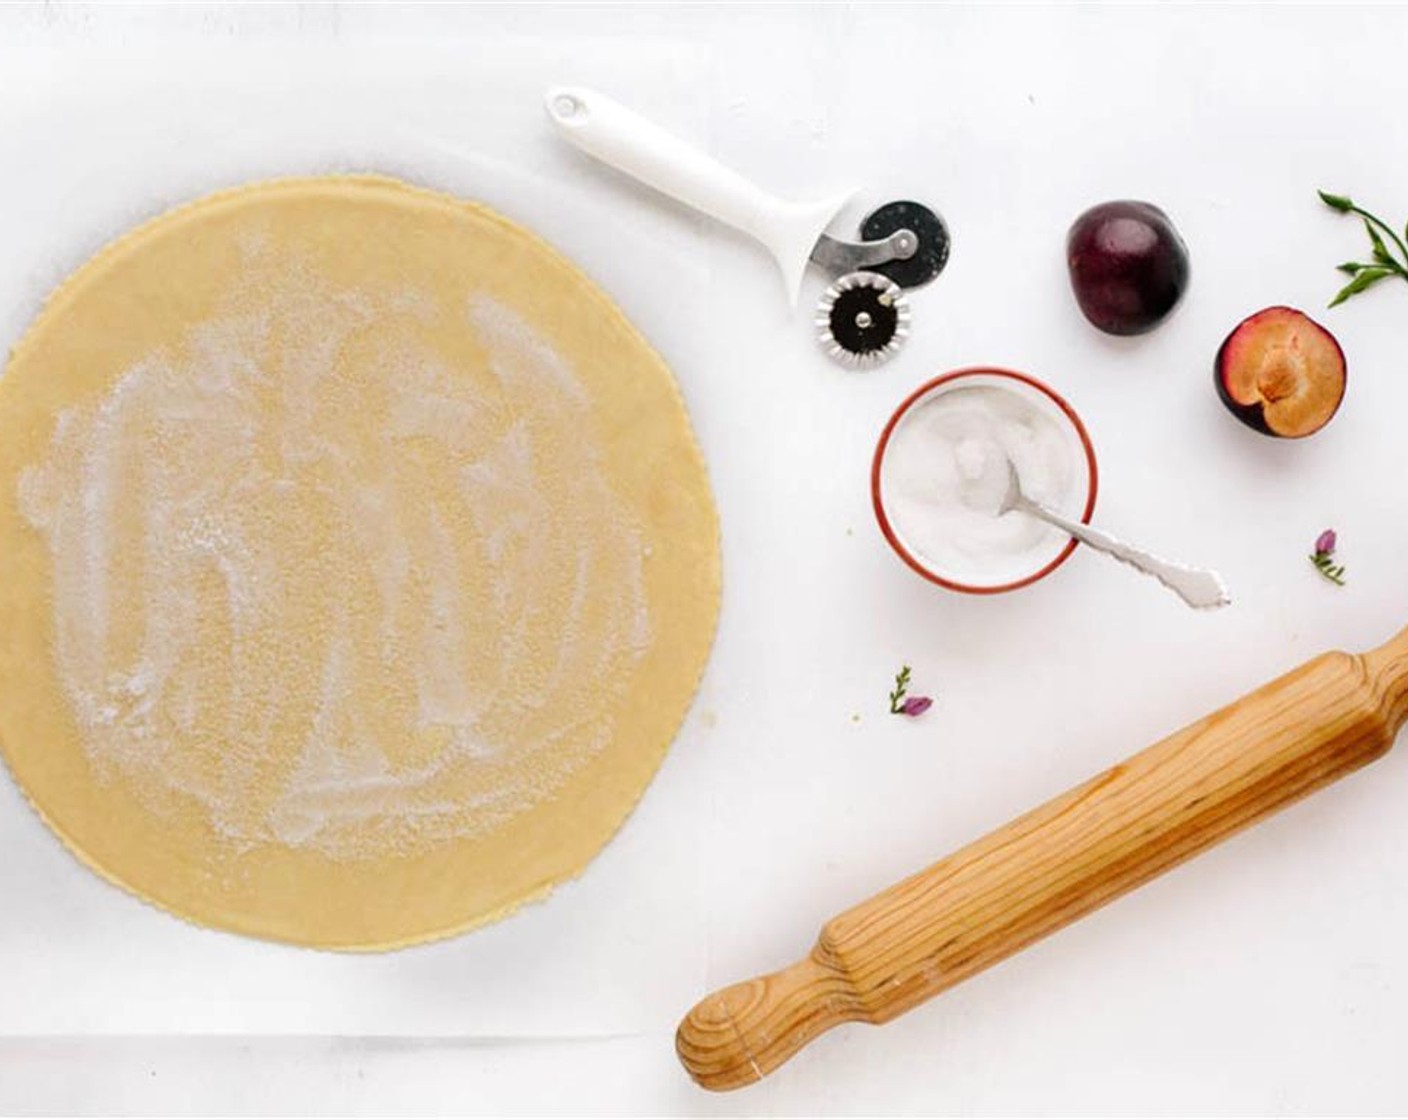 step 9 Unwrap and transfer it onto a lightly floured kitchen counter. Roll it into a 12-inch circle that is 0.15-inch thick. Trim the edges to a clean circle with a pastry cutter.